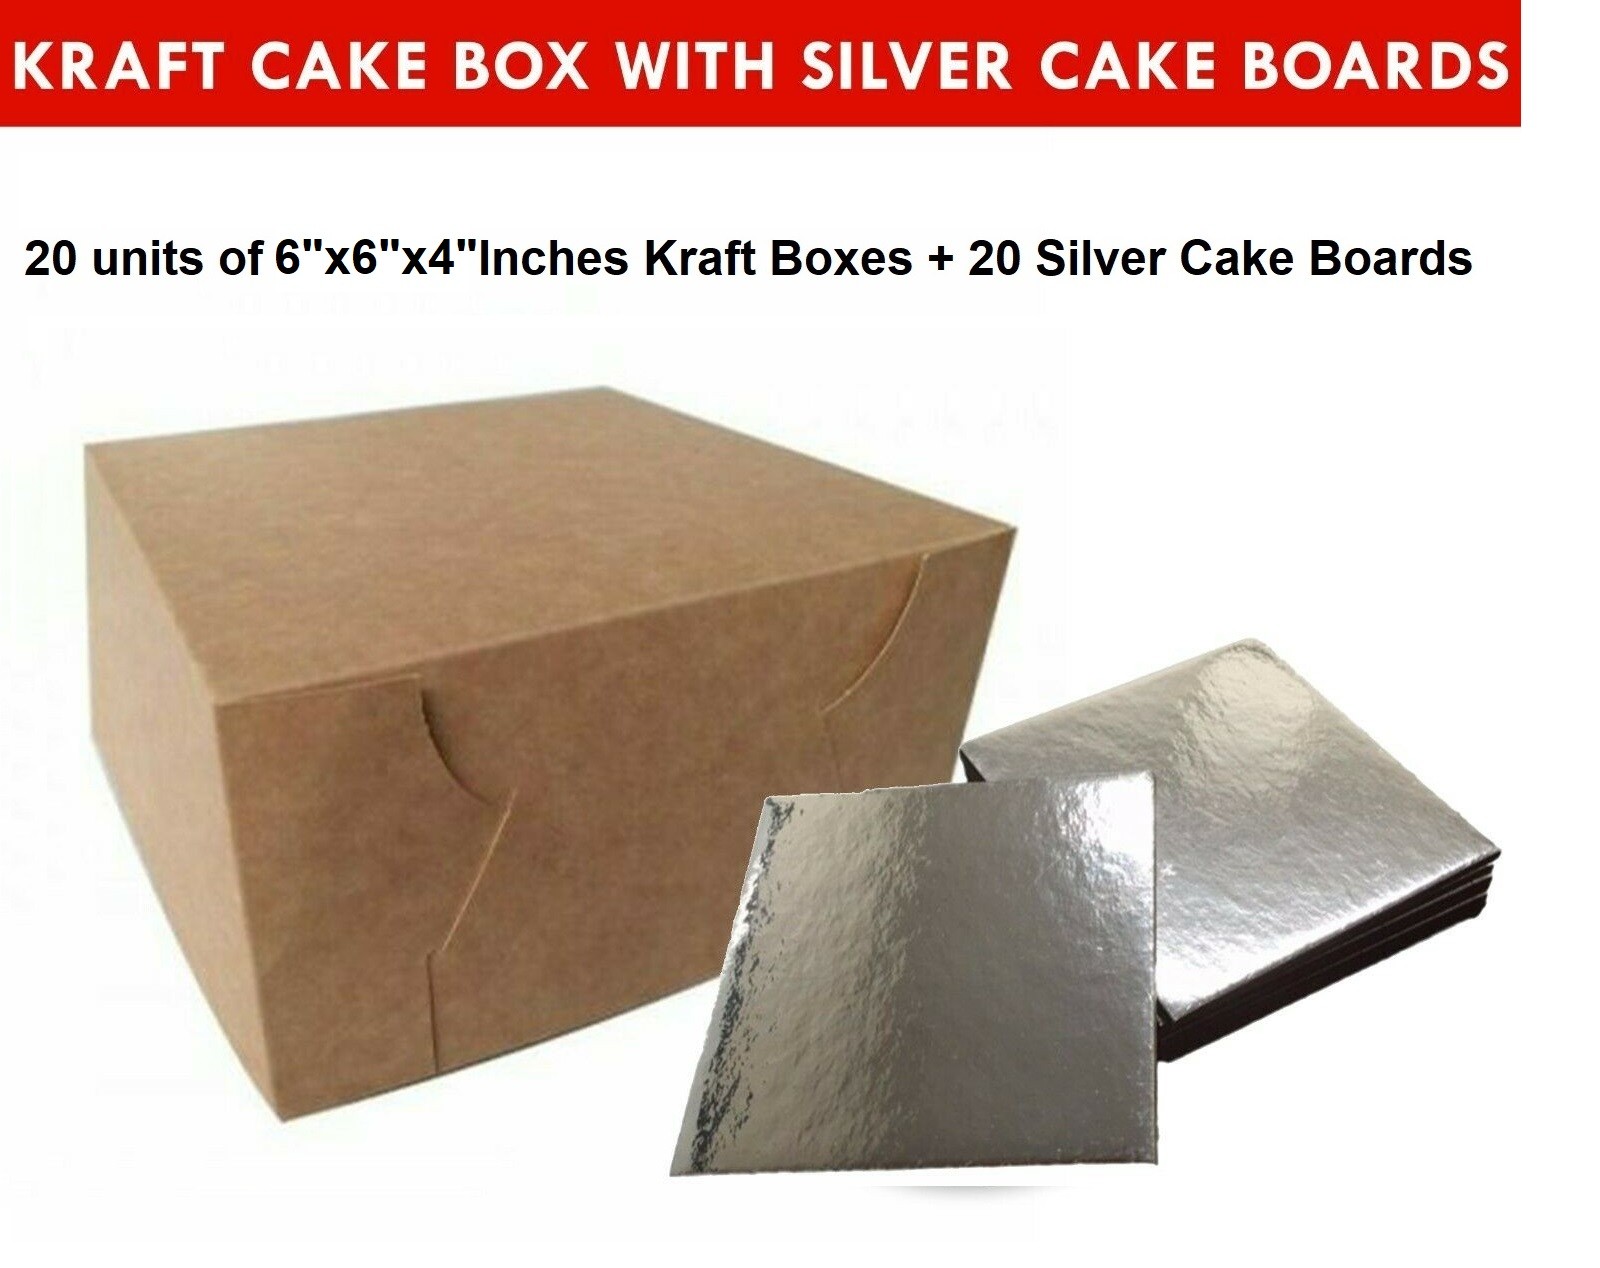 Kraft Cake Boxes with Square boards - 6" x 6" x 4" ($3.4 /pc x 20 units)